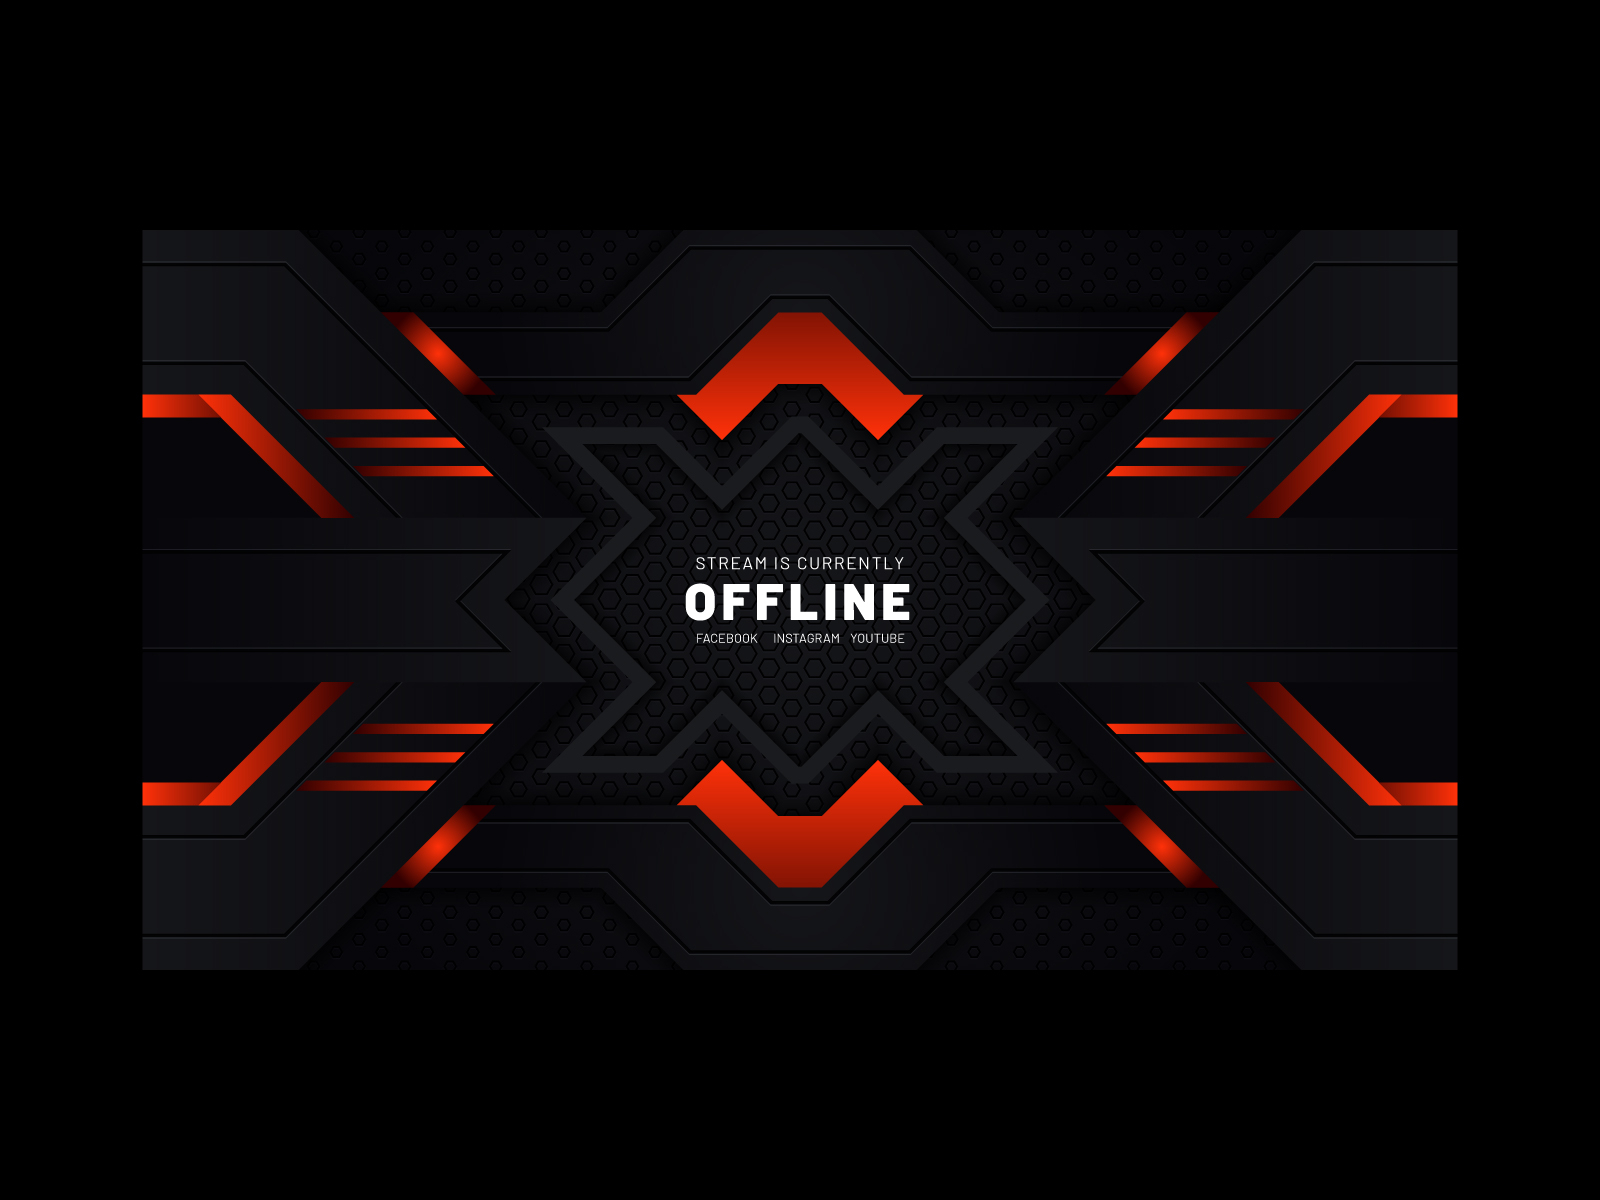 Modern Gaming Streaming Background Design by Obaydul Hoque Imran on Dribbble